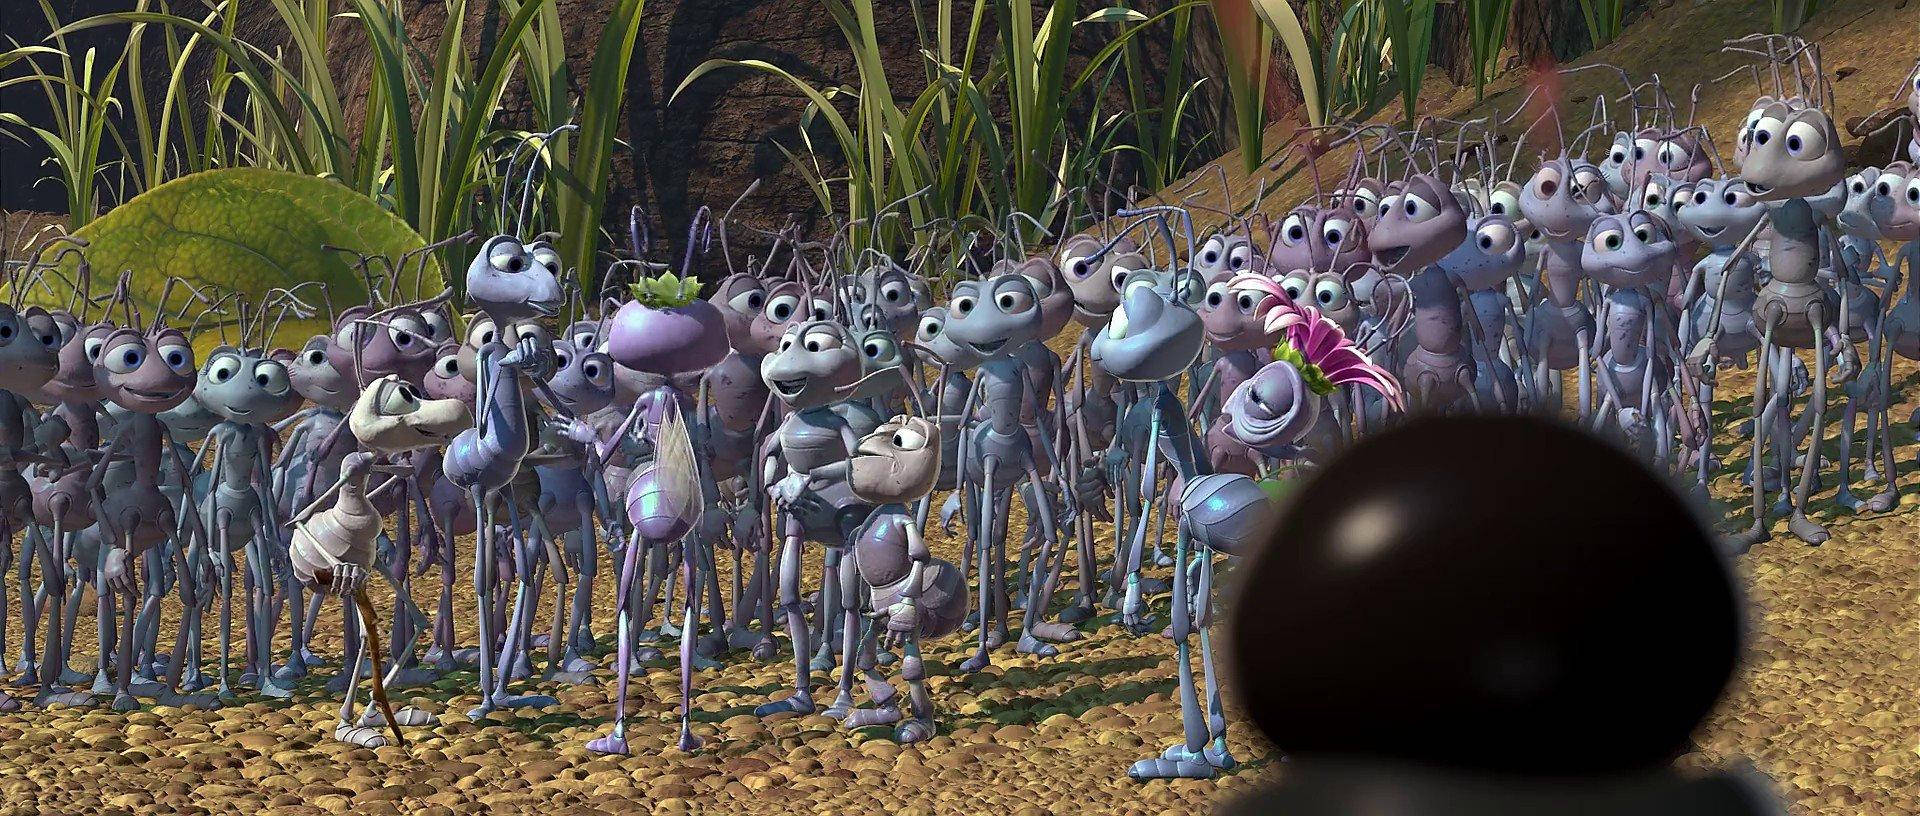 A Bug's Life Ant Colony Background